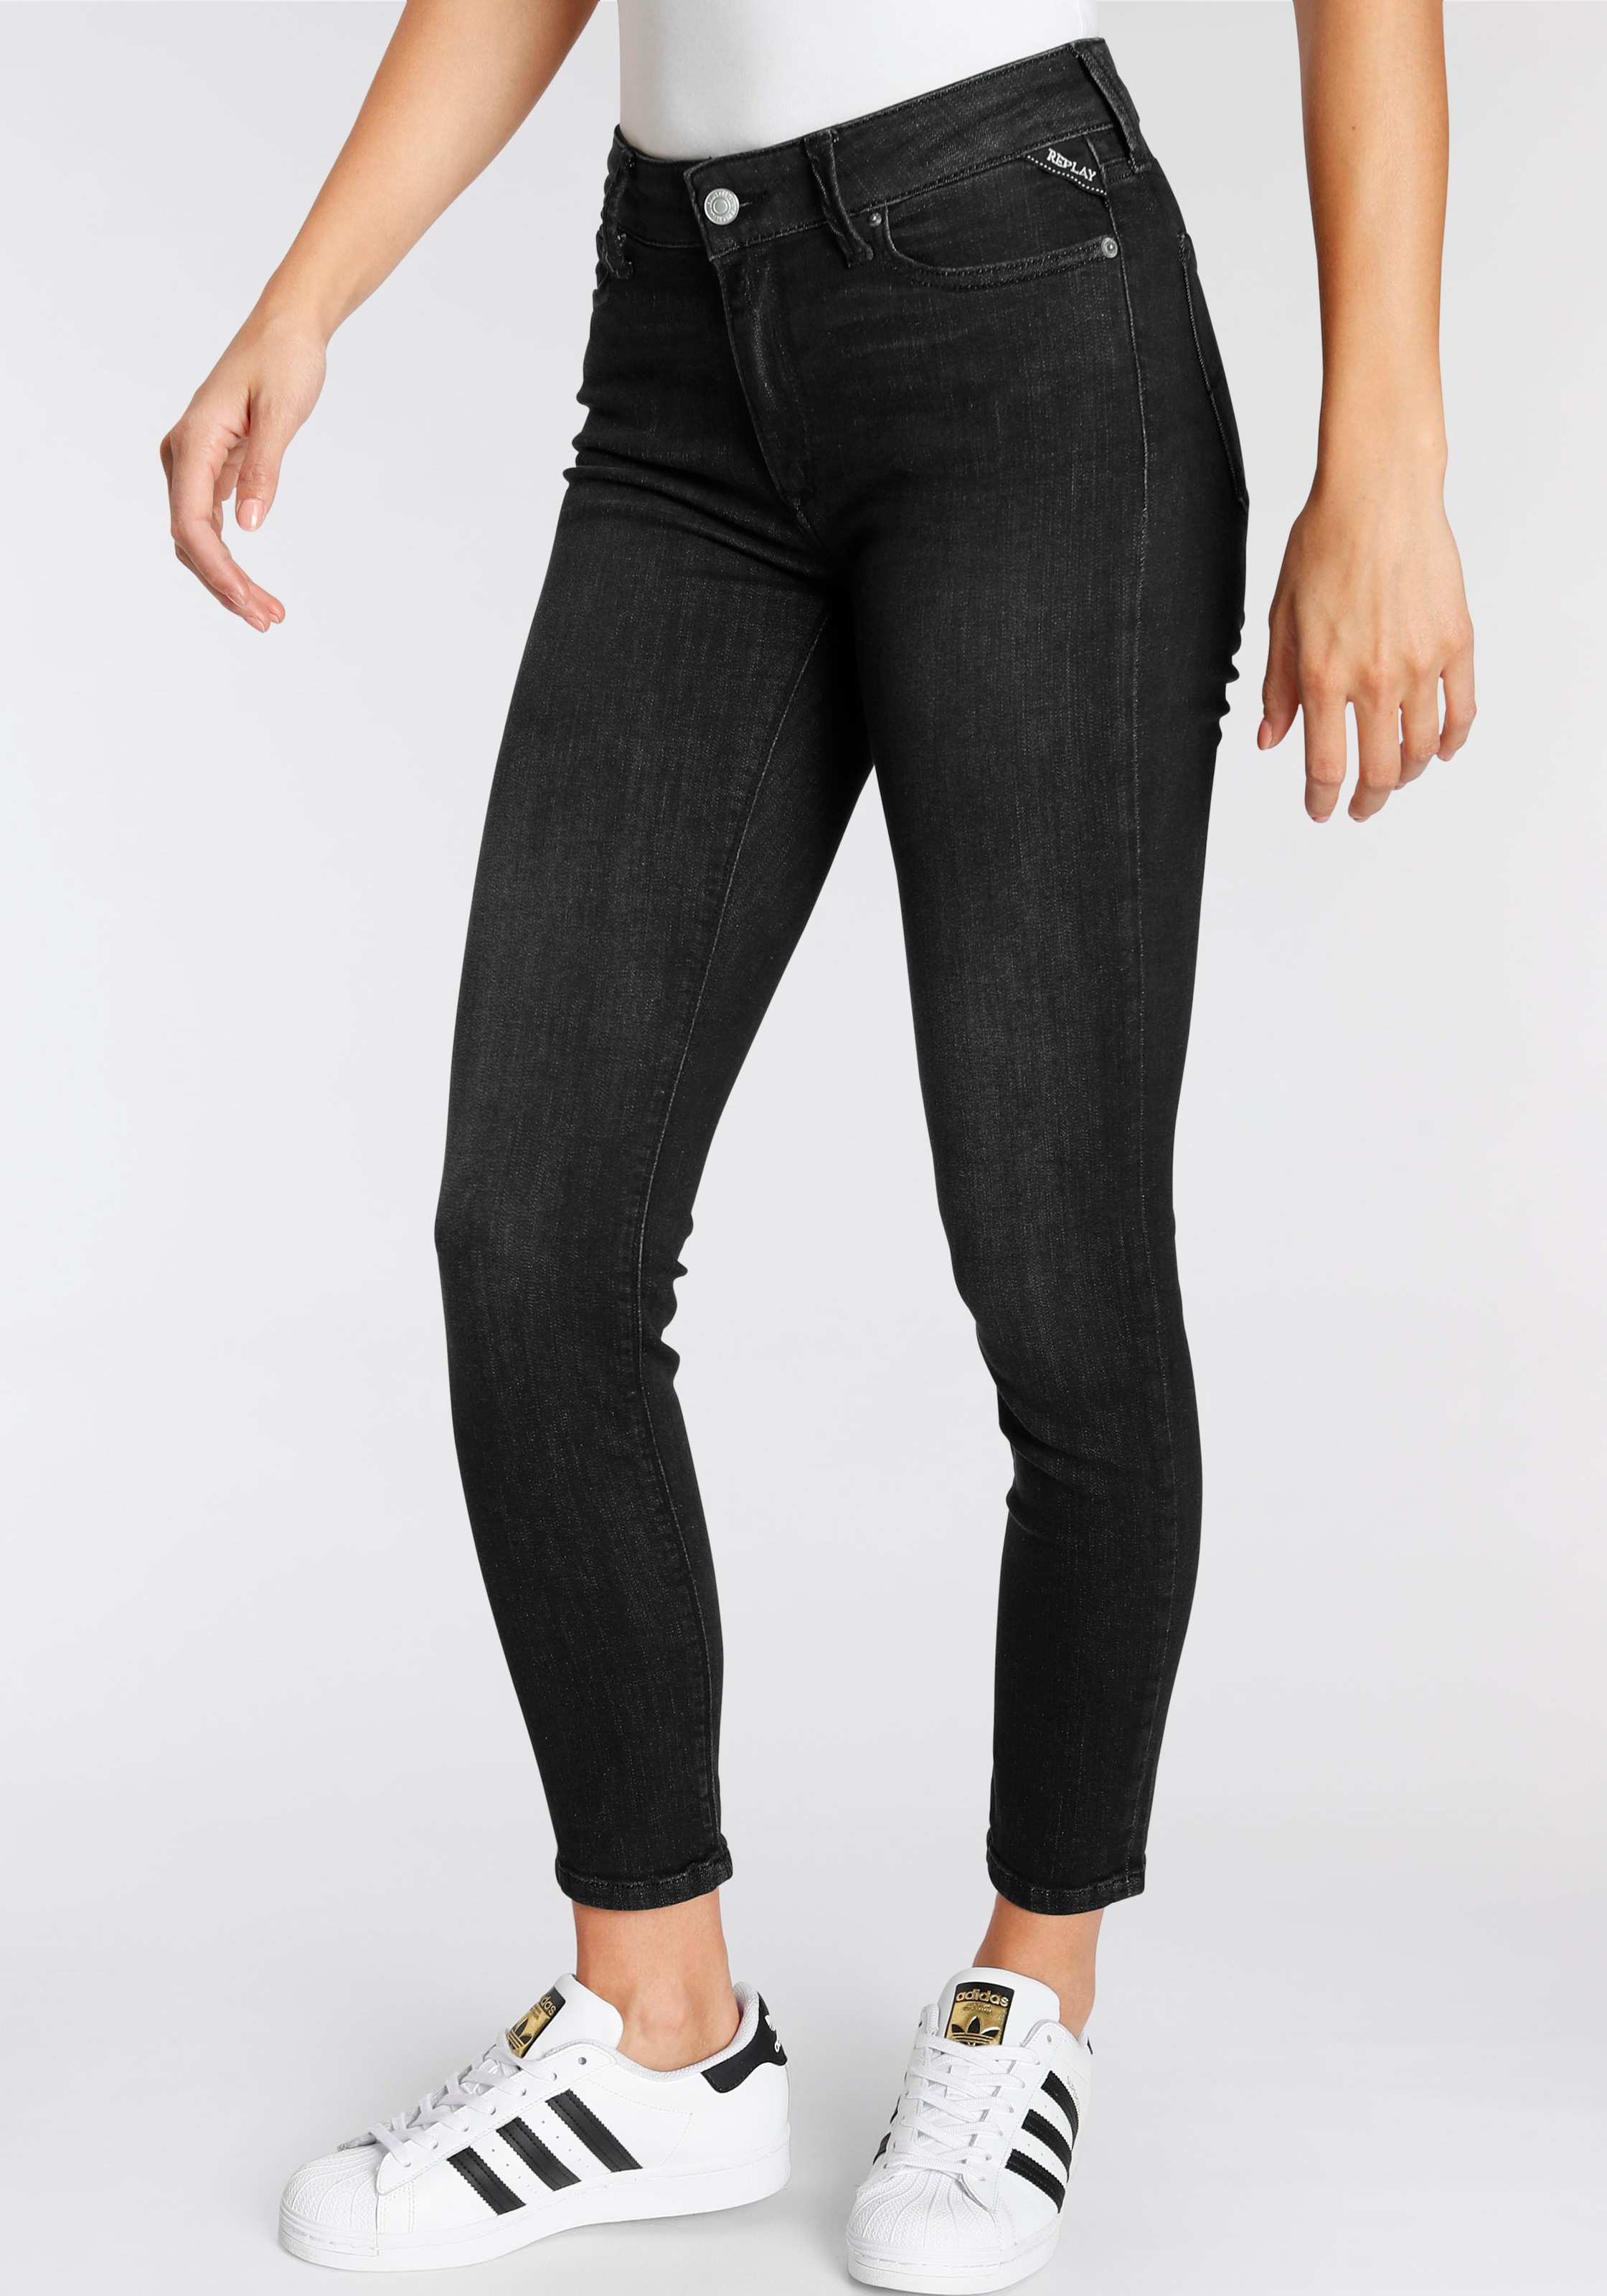 bei STRETCH POWER - Skinny-fit-Jeans High Waist »Luzien«, Replay OTTOversand